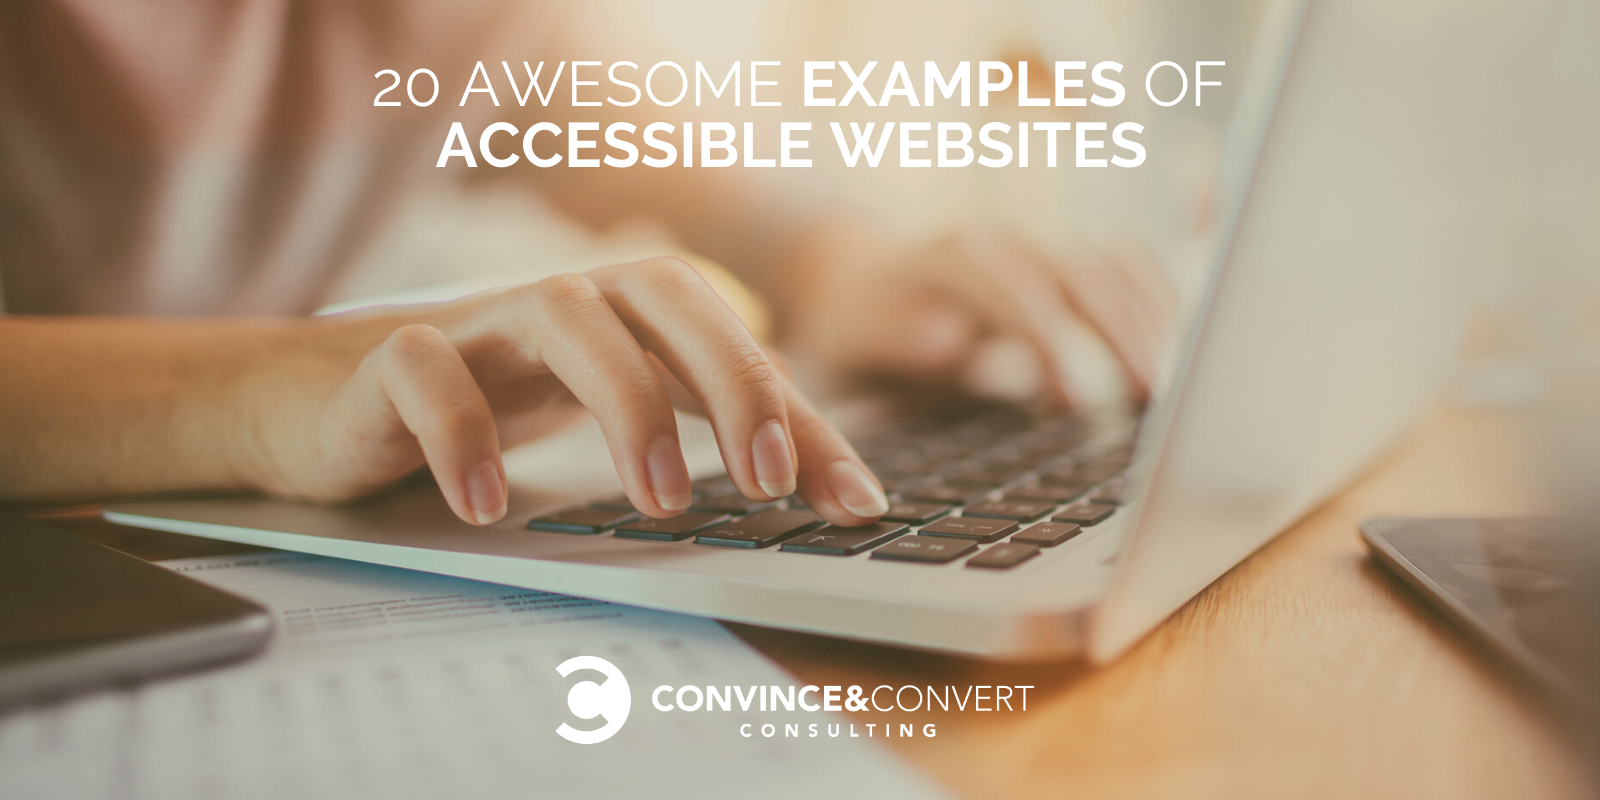 20 Awesome Examples of Accessible Websites